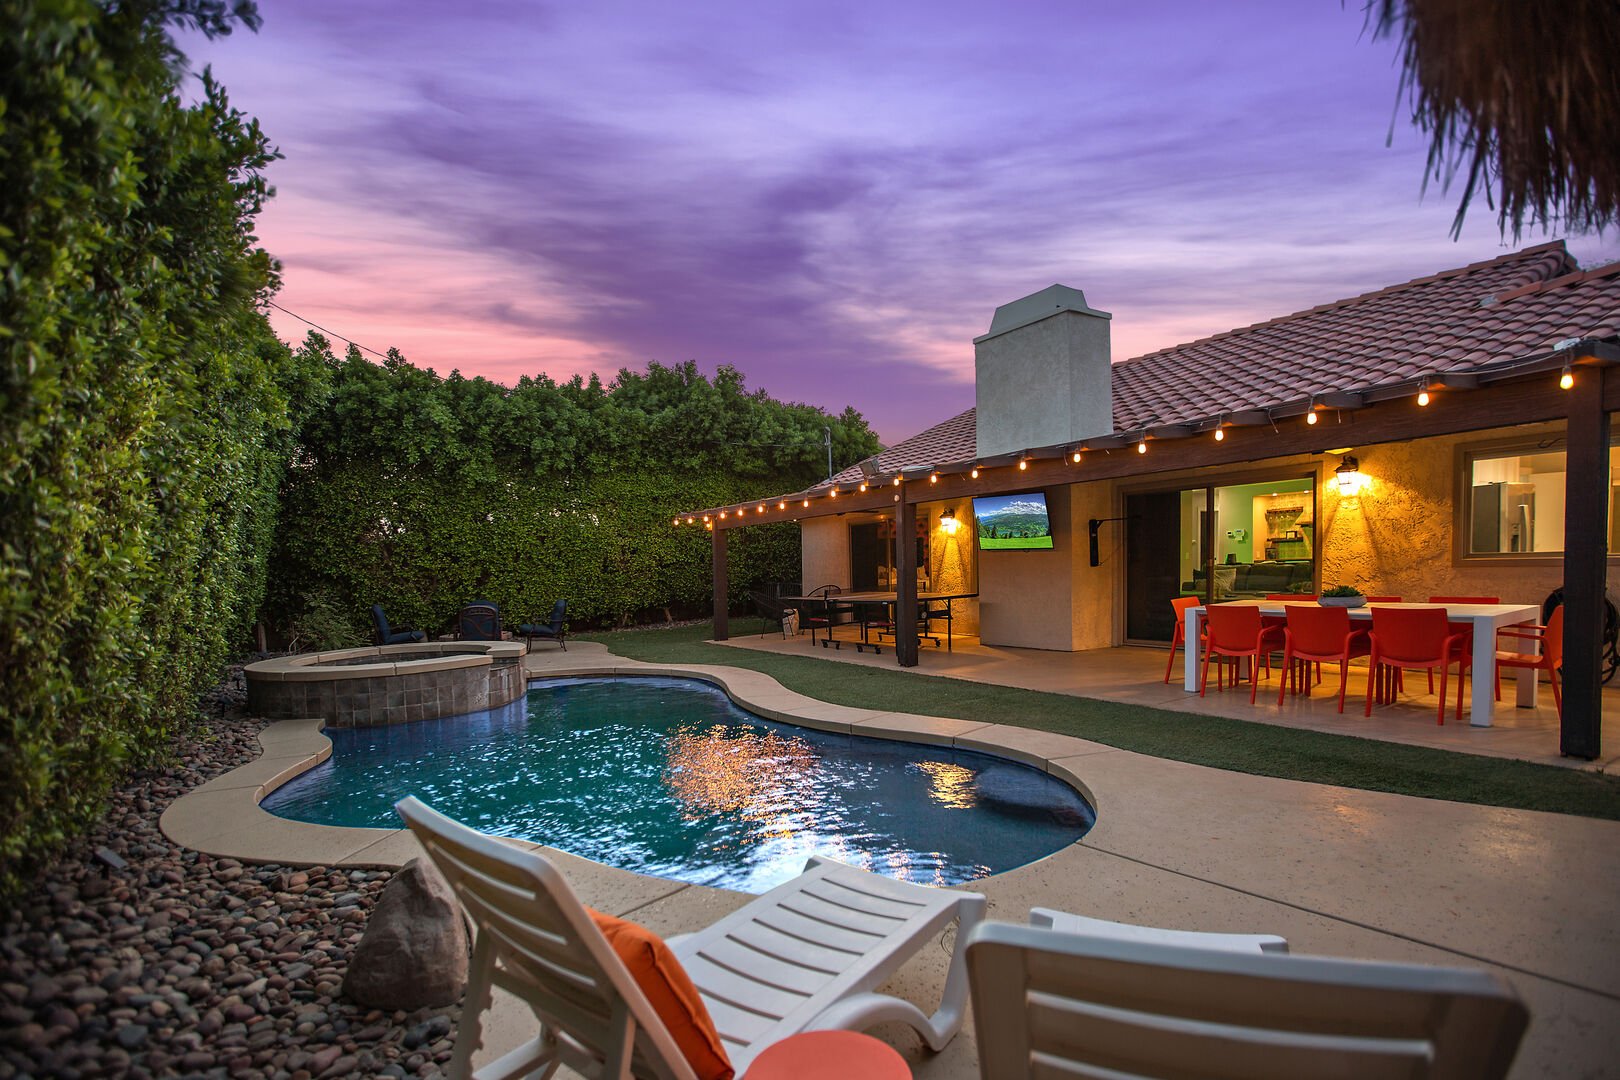 Suite Spot has a backyard made for entertaining and lounging out on those sunny days.